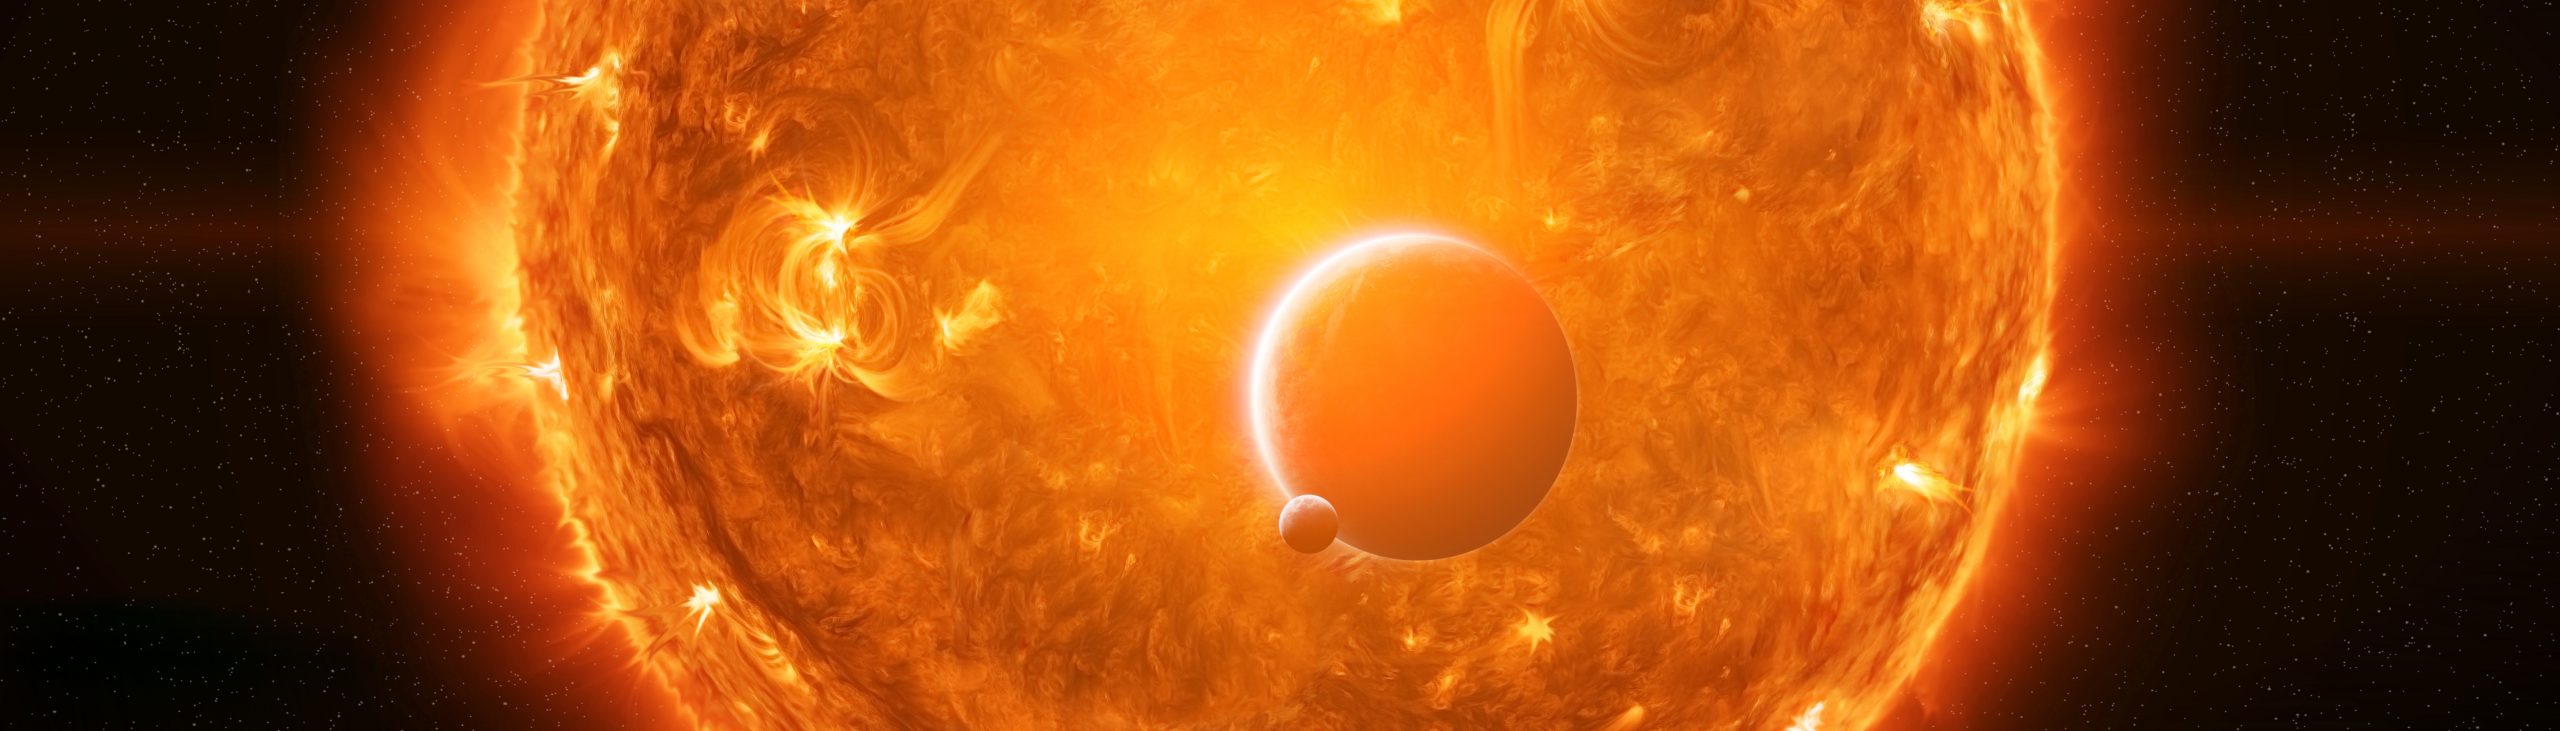 An artists rendering of a distant exoplanet orbiting its star. Depositphotos.